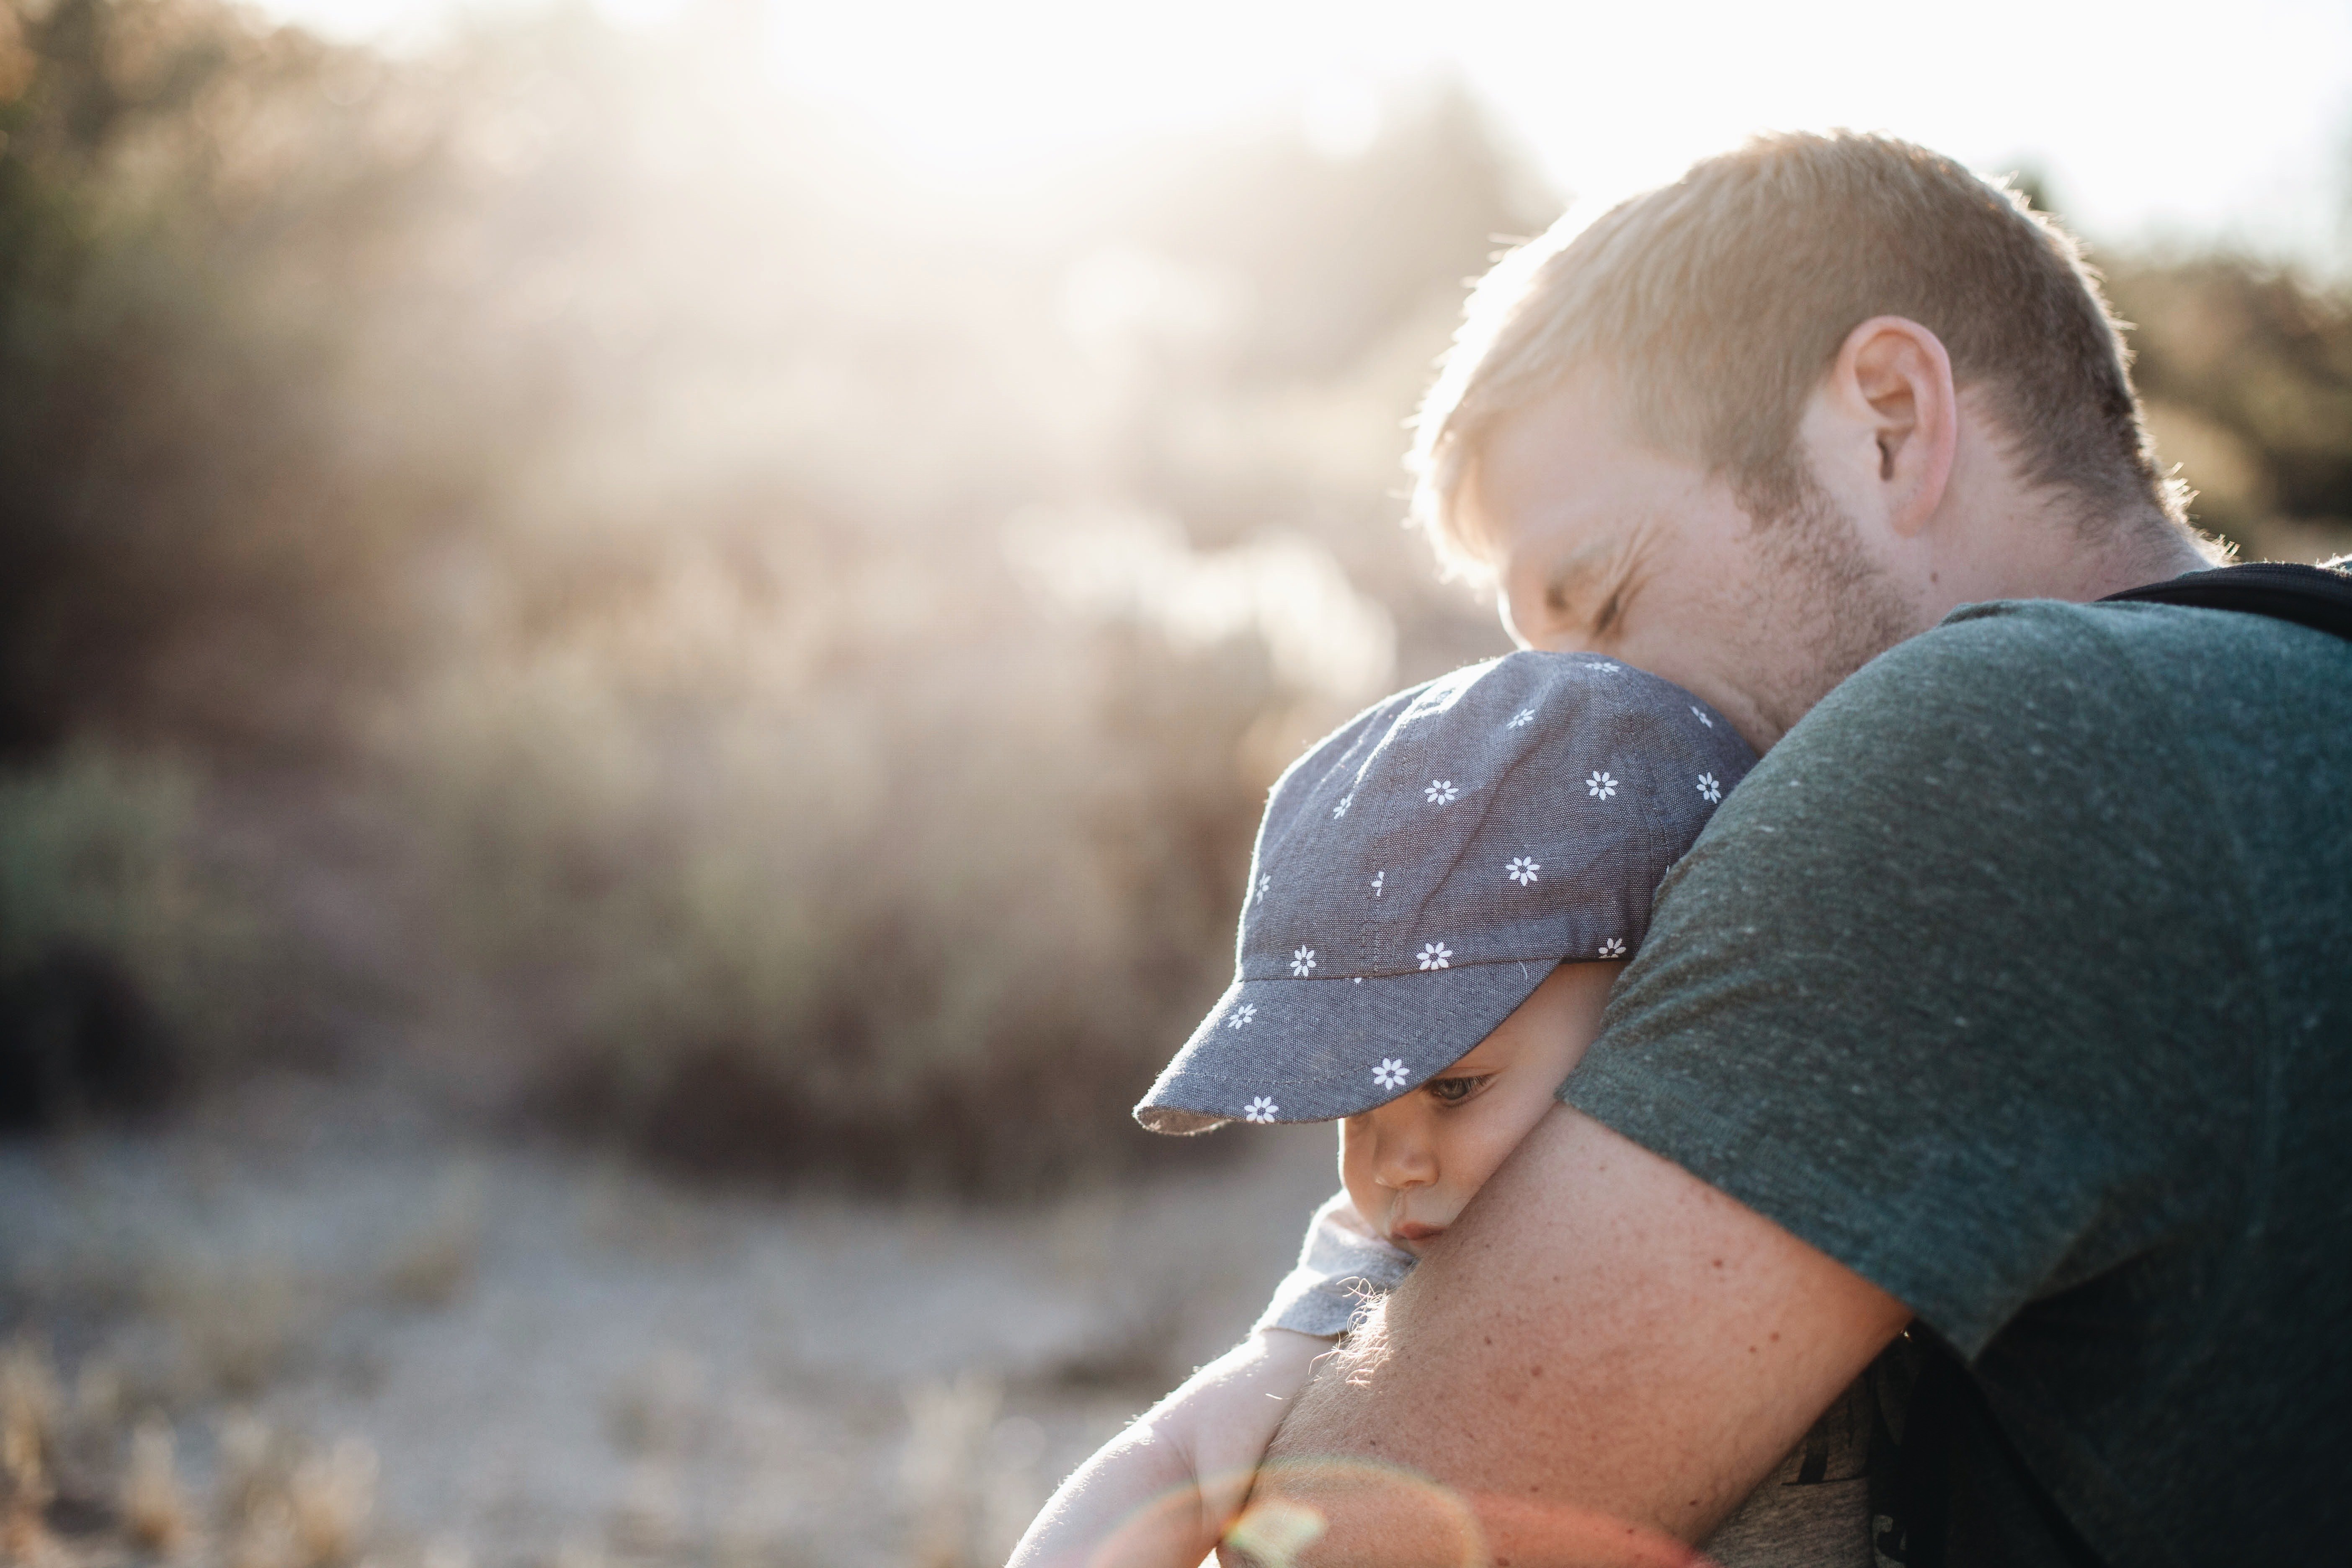 A father hugging his son | Source: Pexels